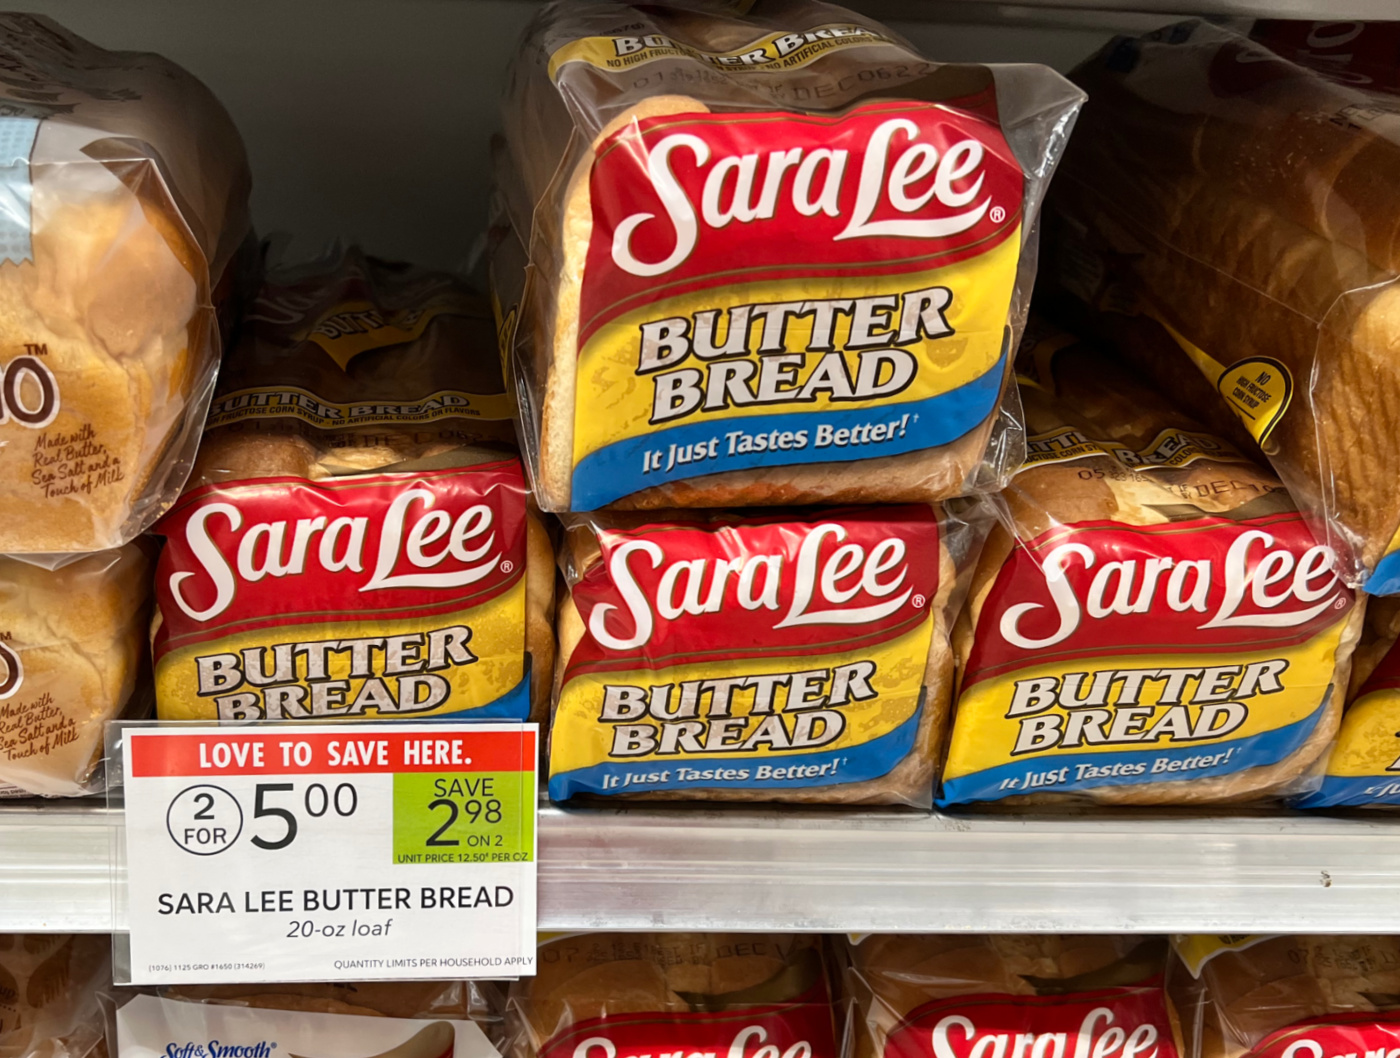 Sara Lee Butter Bread As Low As $ At Publix - iHeartPublix